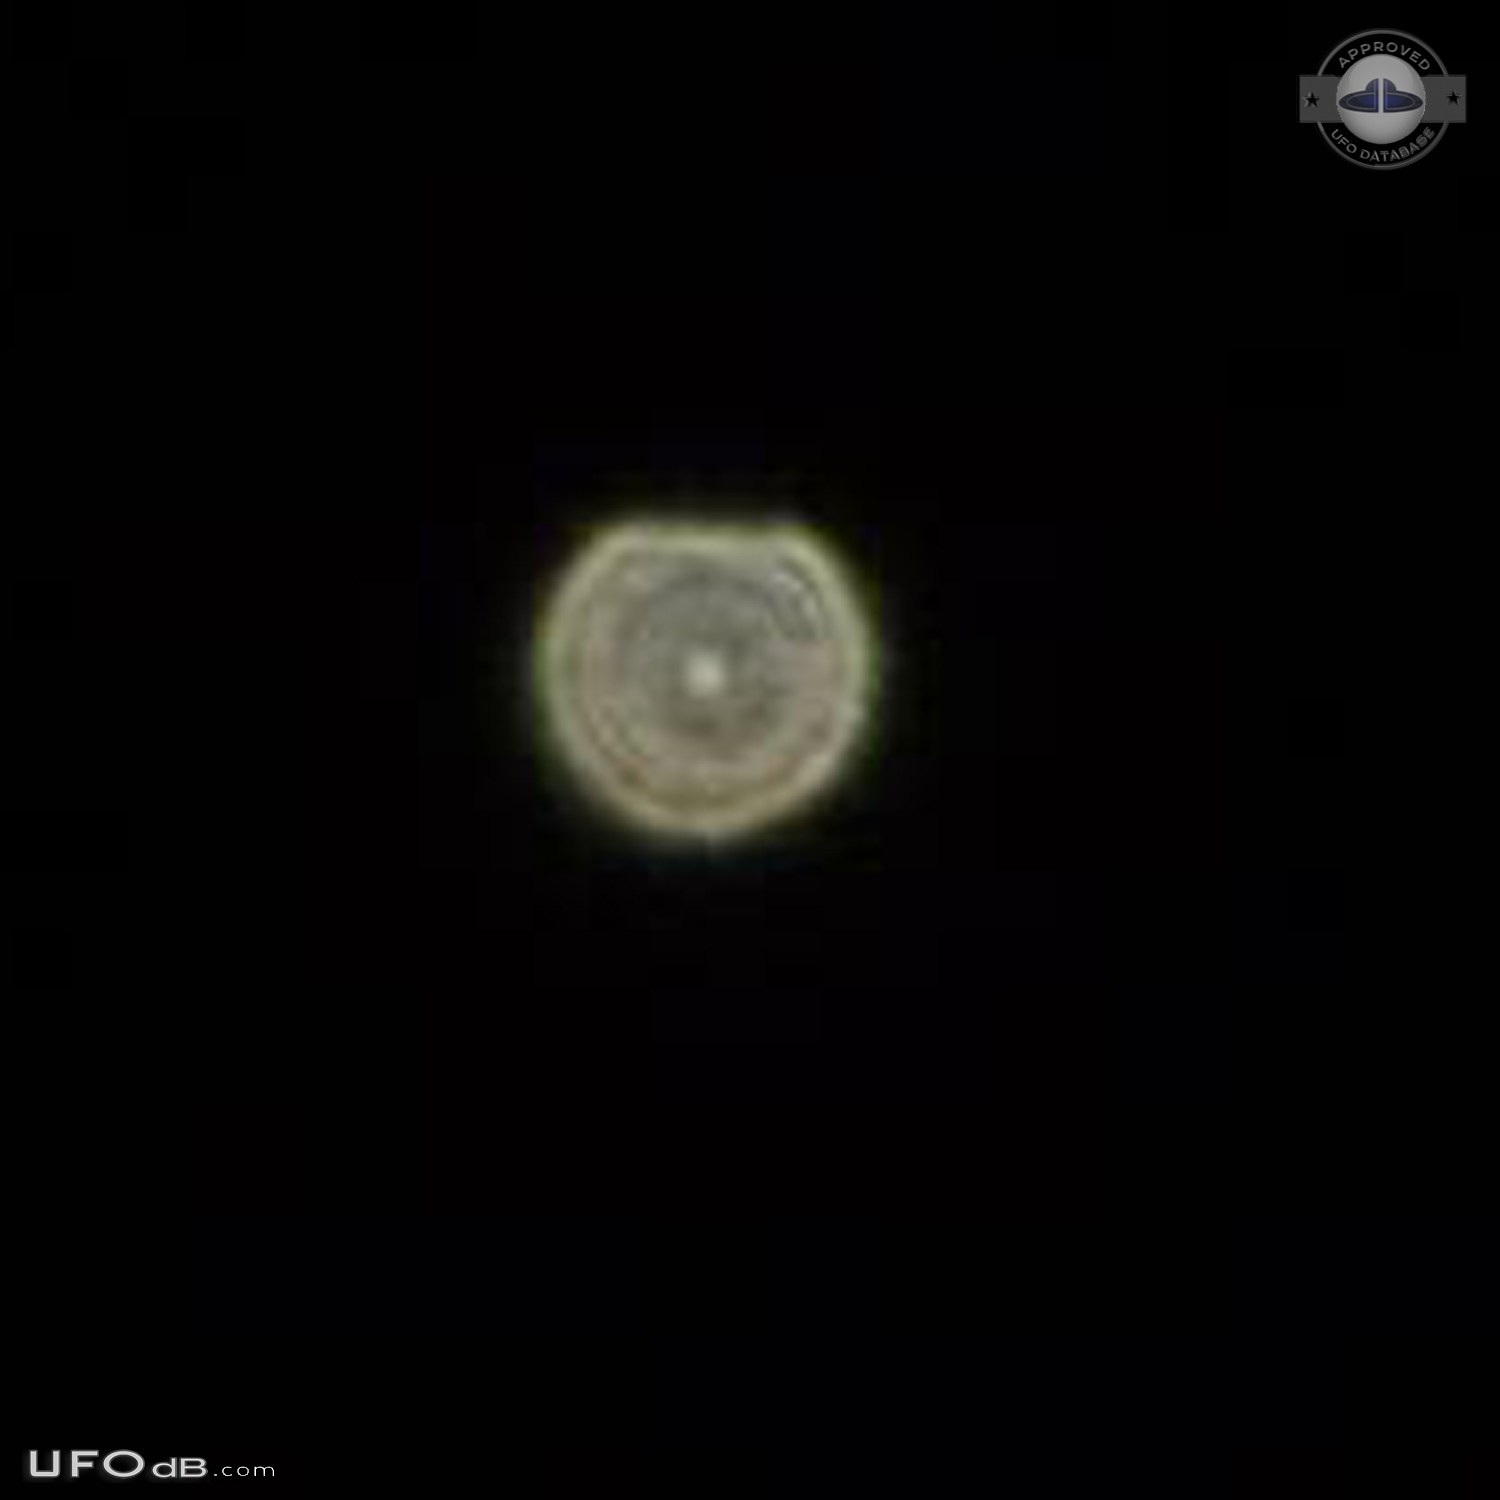 Thought was a star but UFO 10x larger than any other star - Florida UFO Picture #718-6